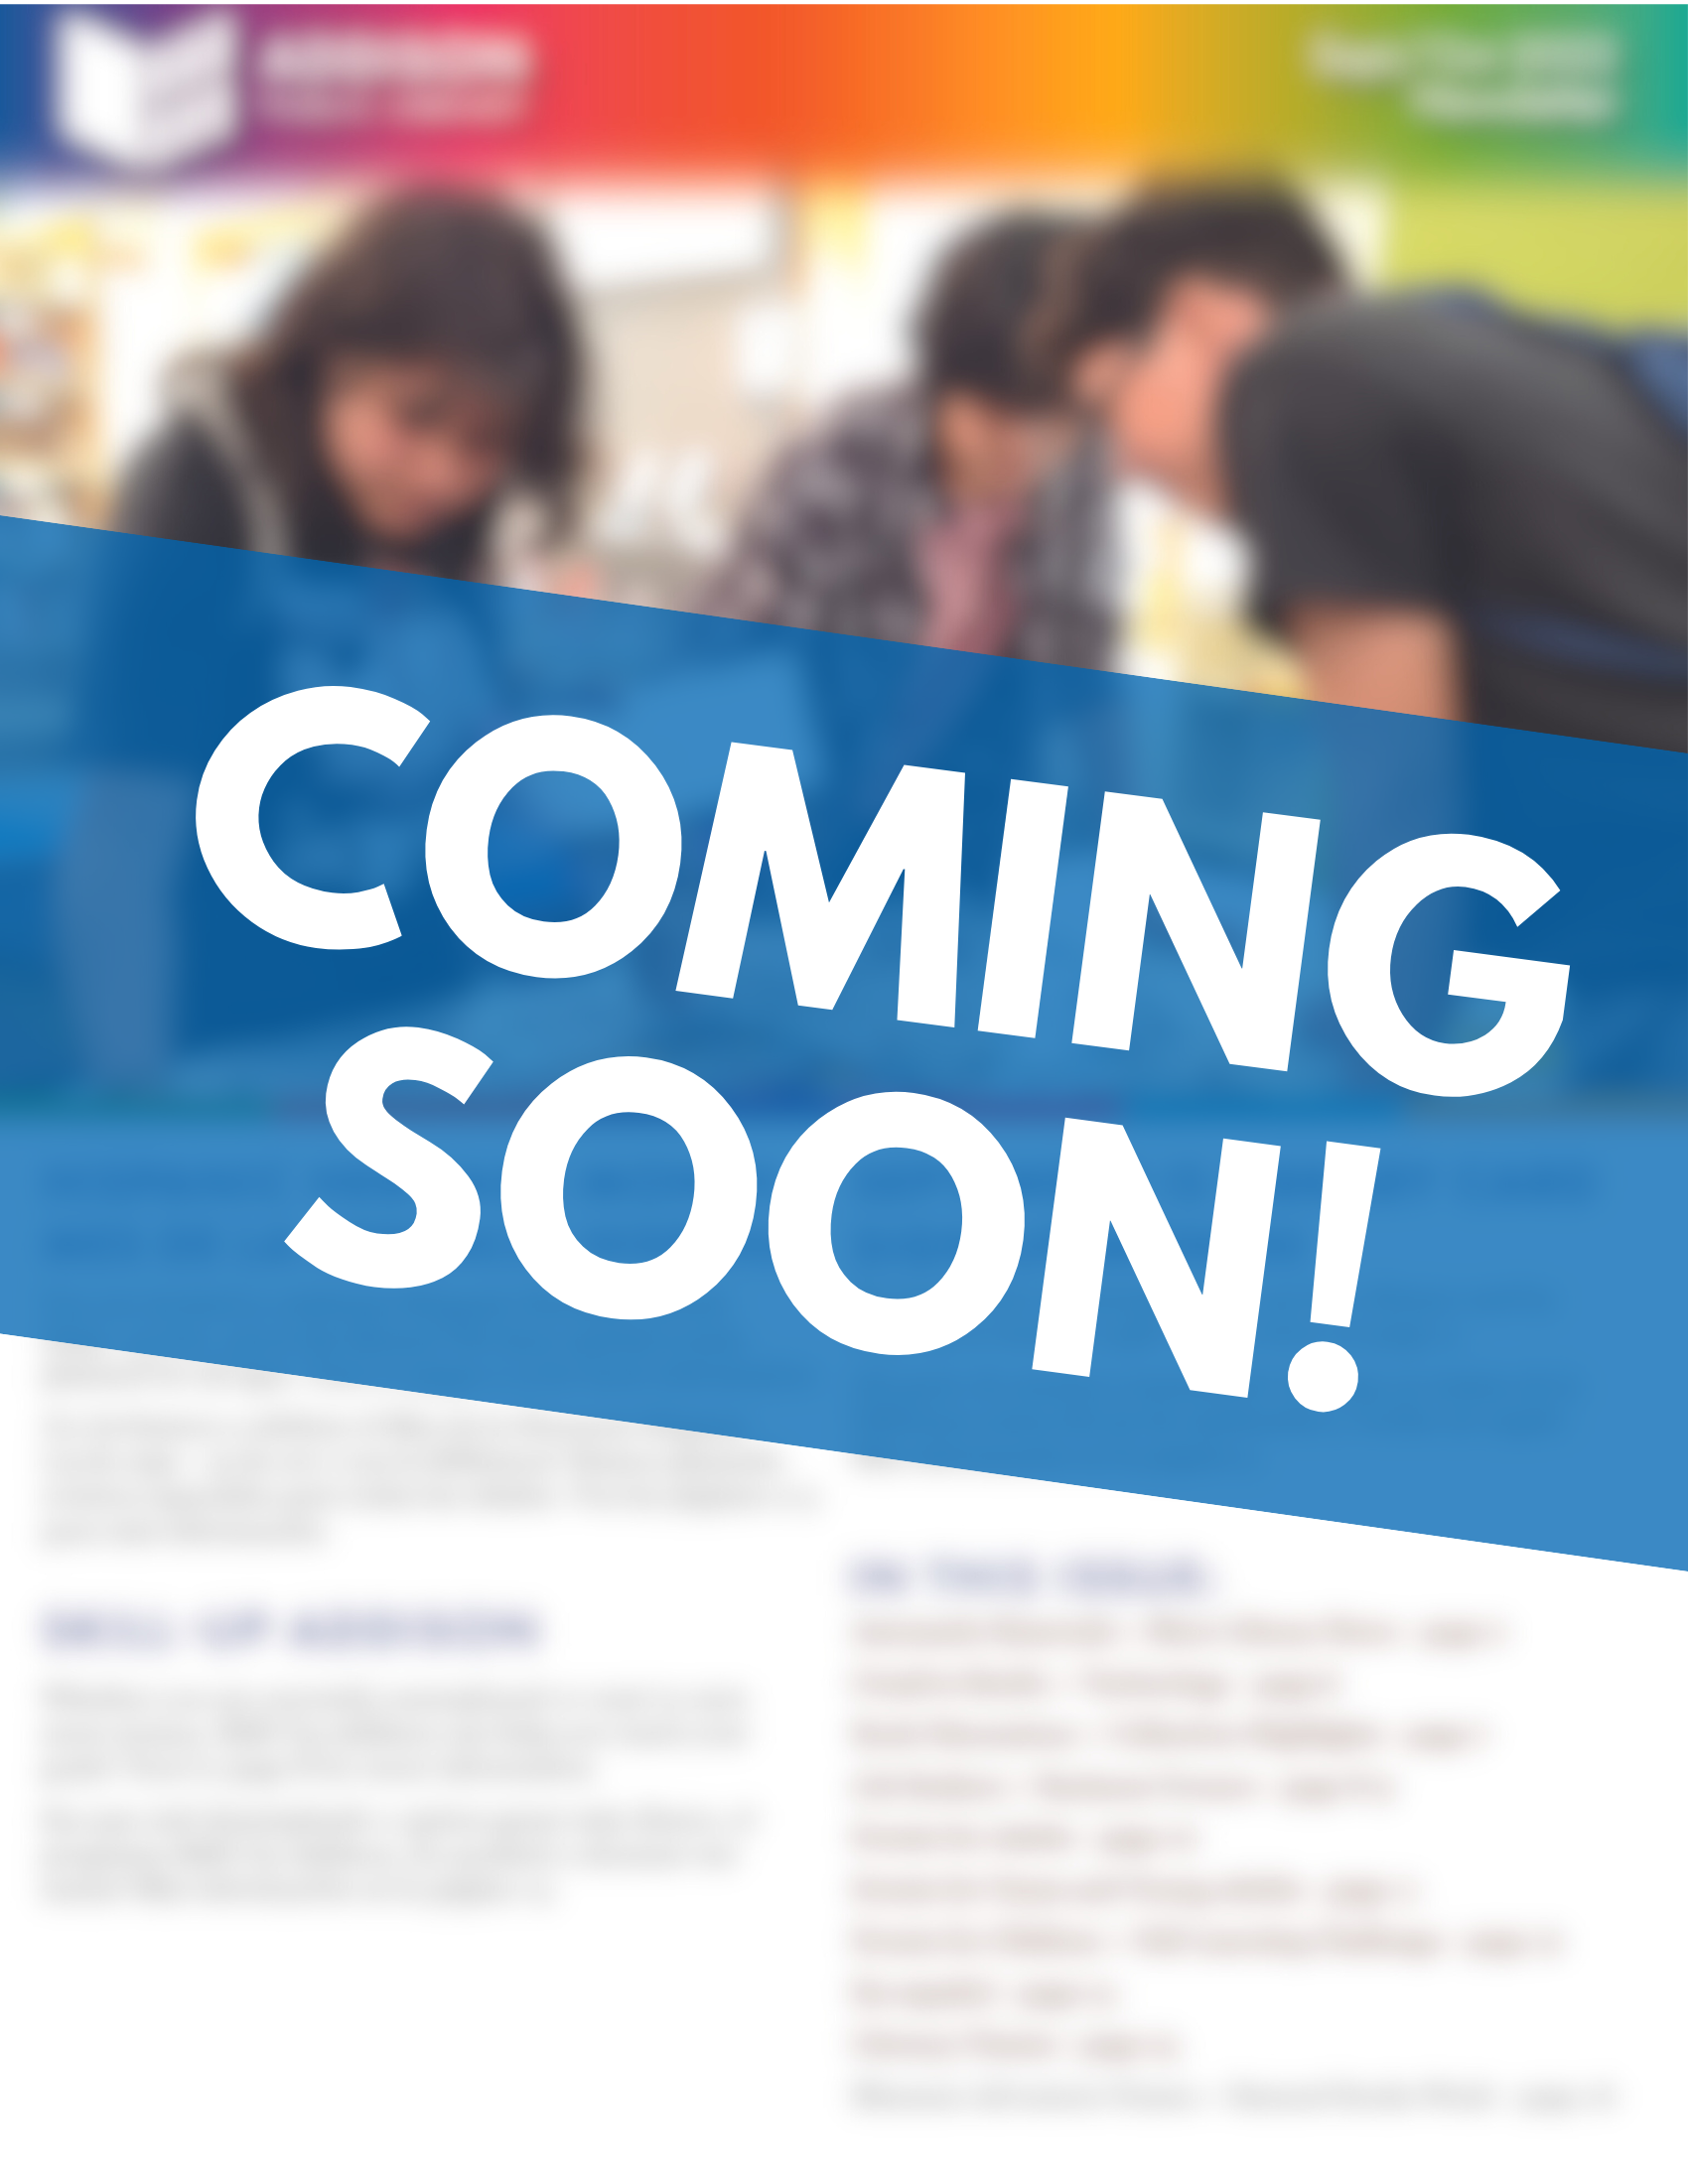 Blurred cover of library newsletter with the words "Coming Soon"